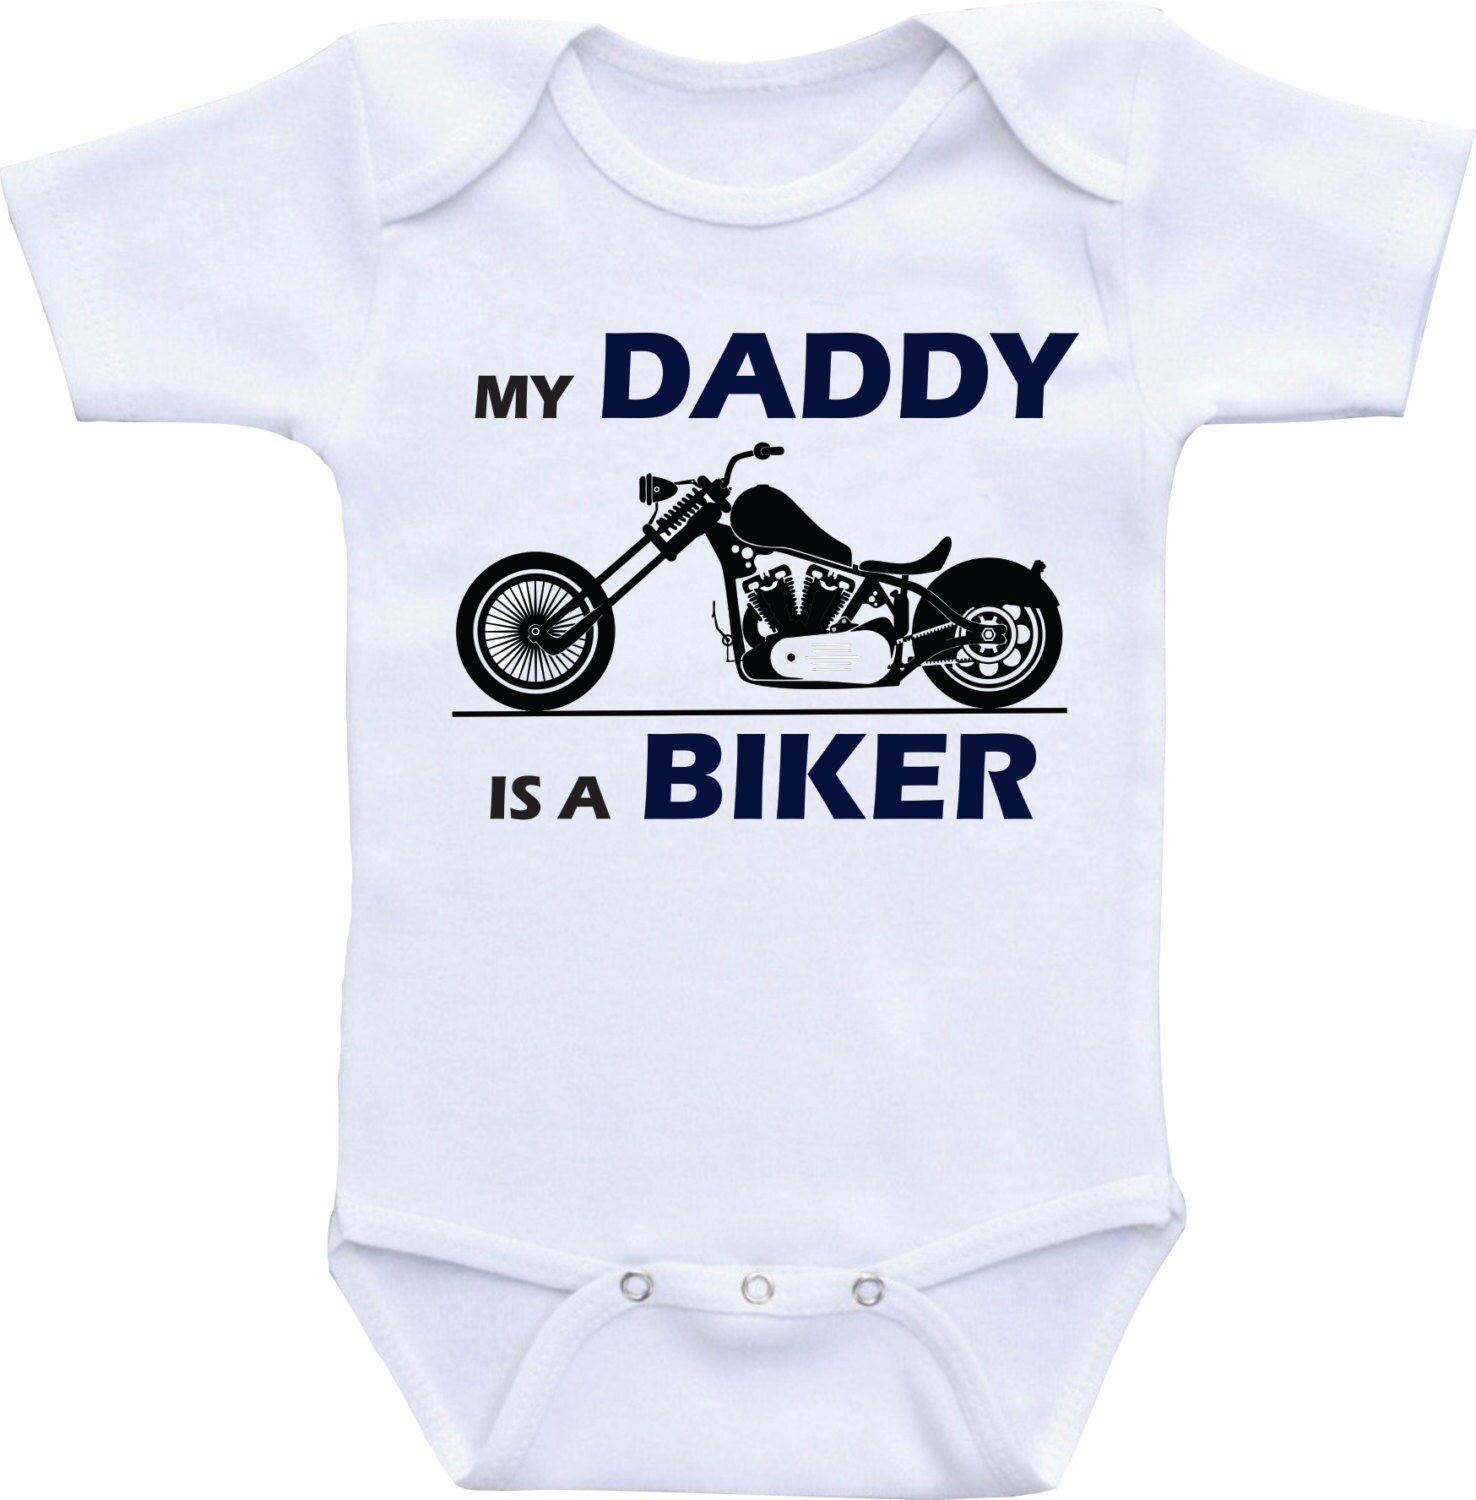 Motorcycle Onesies My Daddy is a Biker Daddy Bike Rider baby